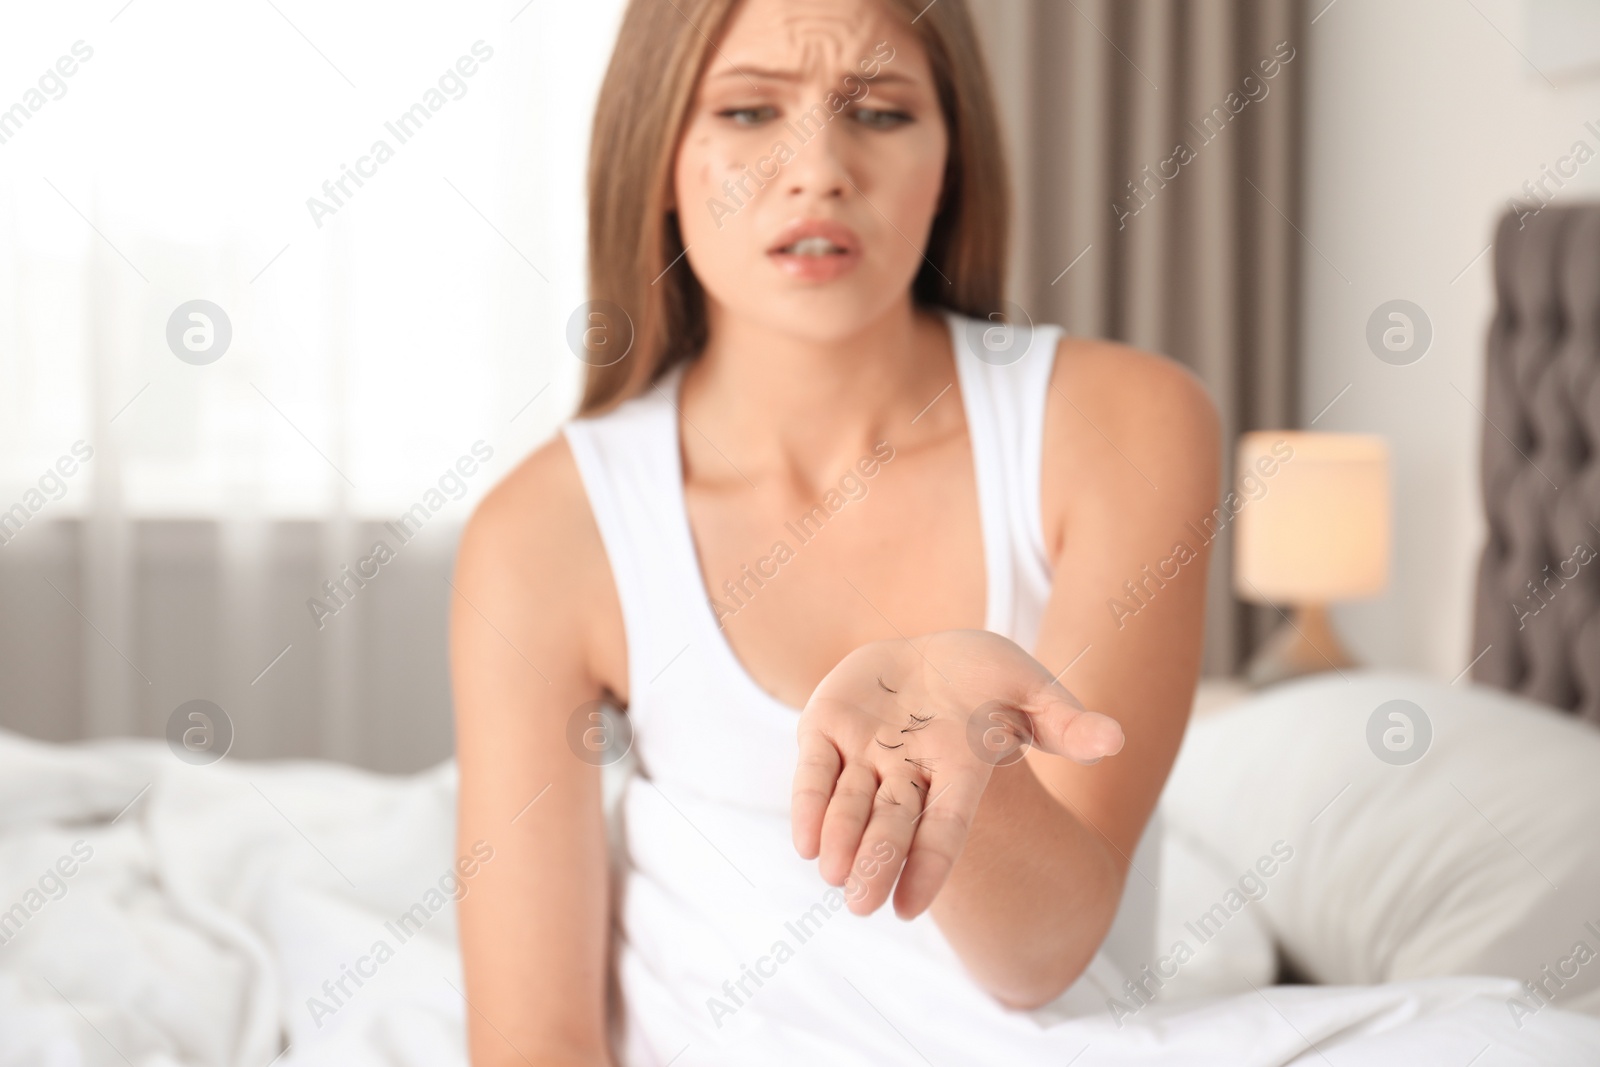 Photo of Emotional young woman holding fallen eyelashes indoors